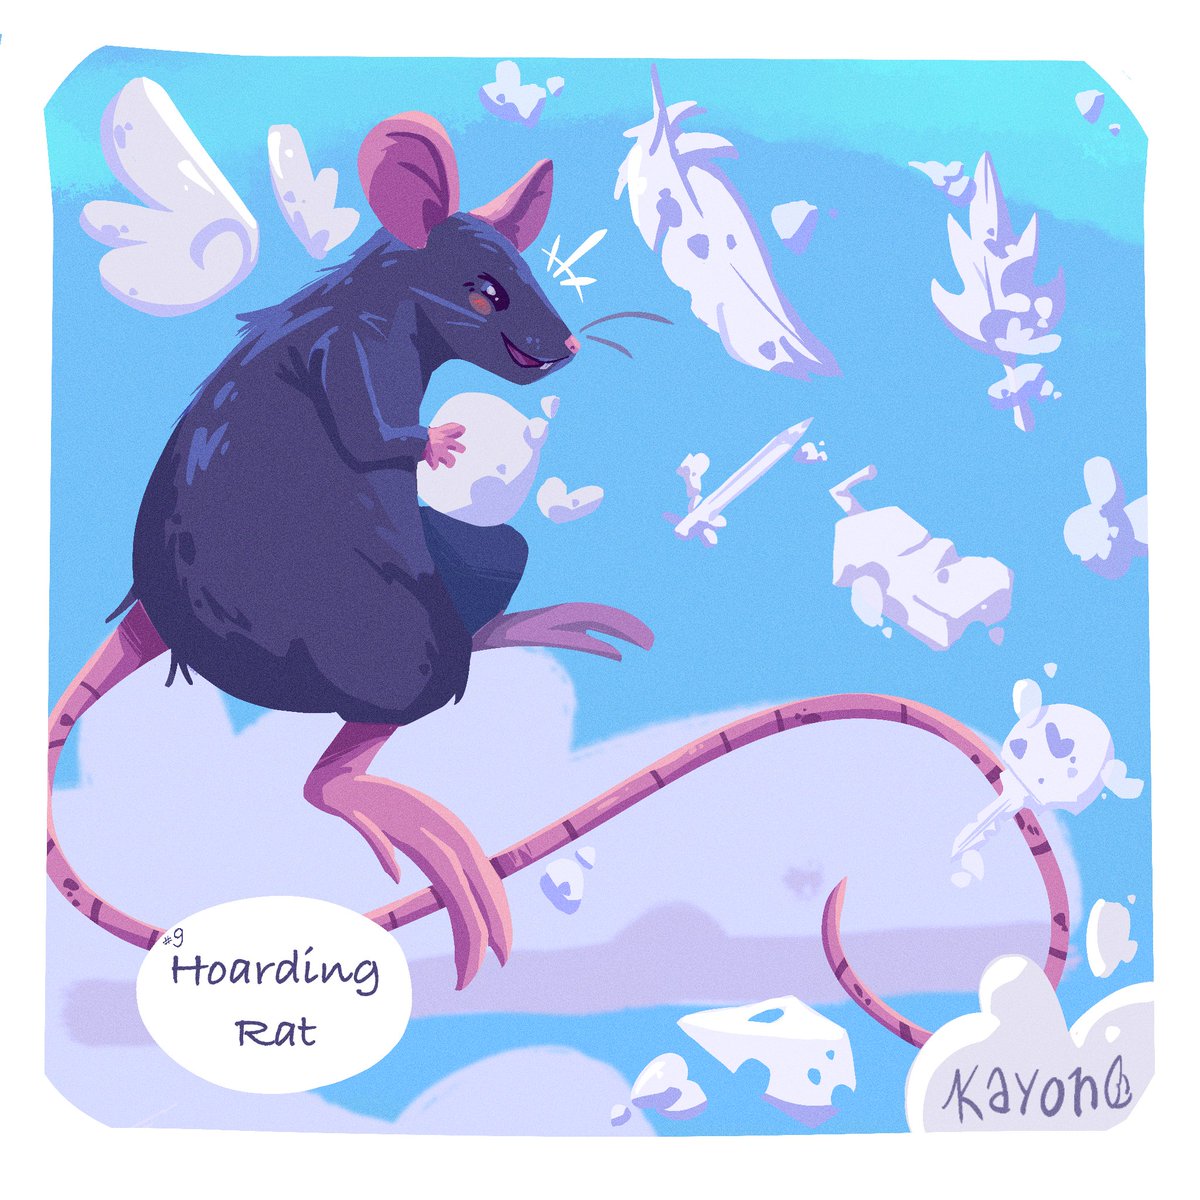 Day 9 is Hoarding Rat !
I had a hard time with this one 🐀☁️

#myart #digitalart #rattober #rattober2022 #beansrattober #inktober #inktober2022 #inktoberday9 #ratart #petrat #petart #illustration